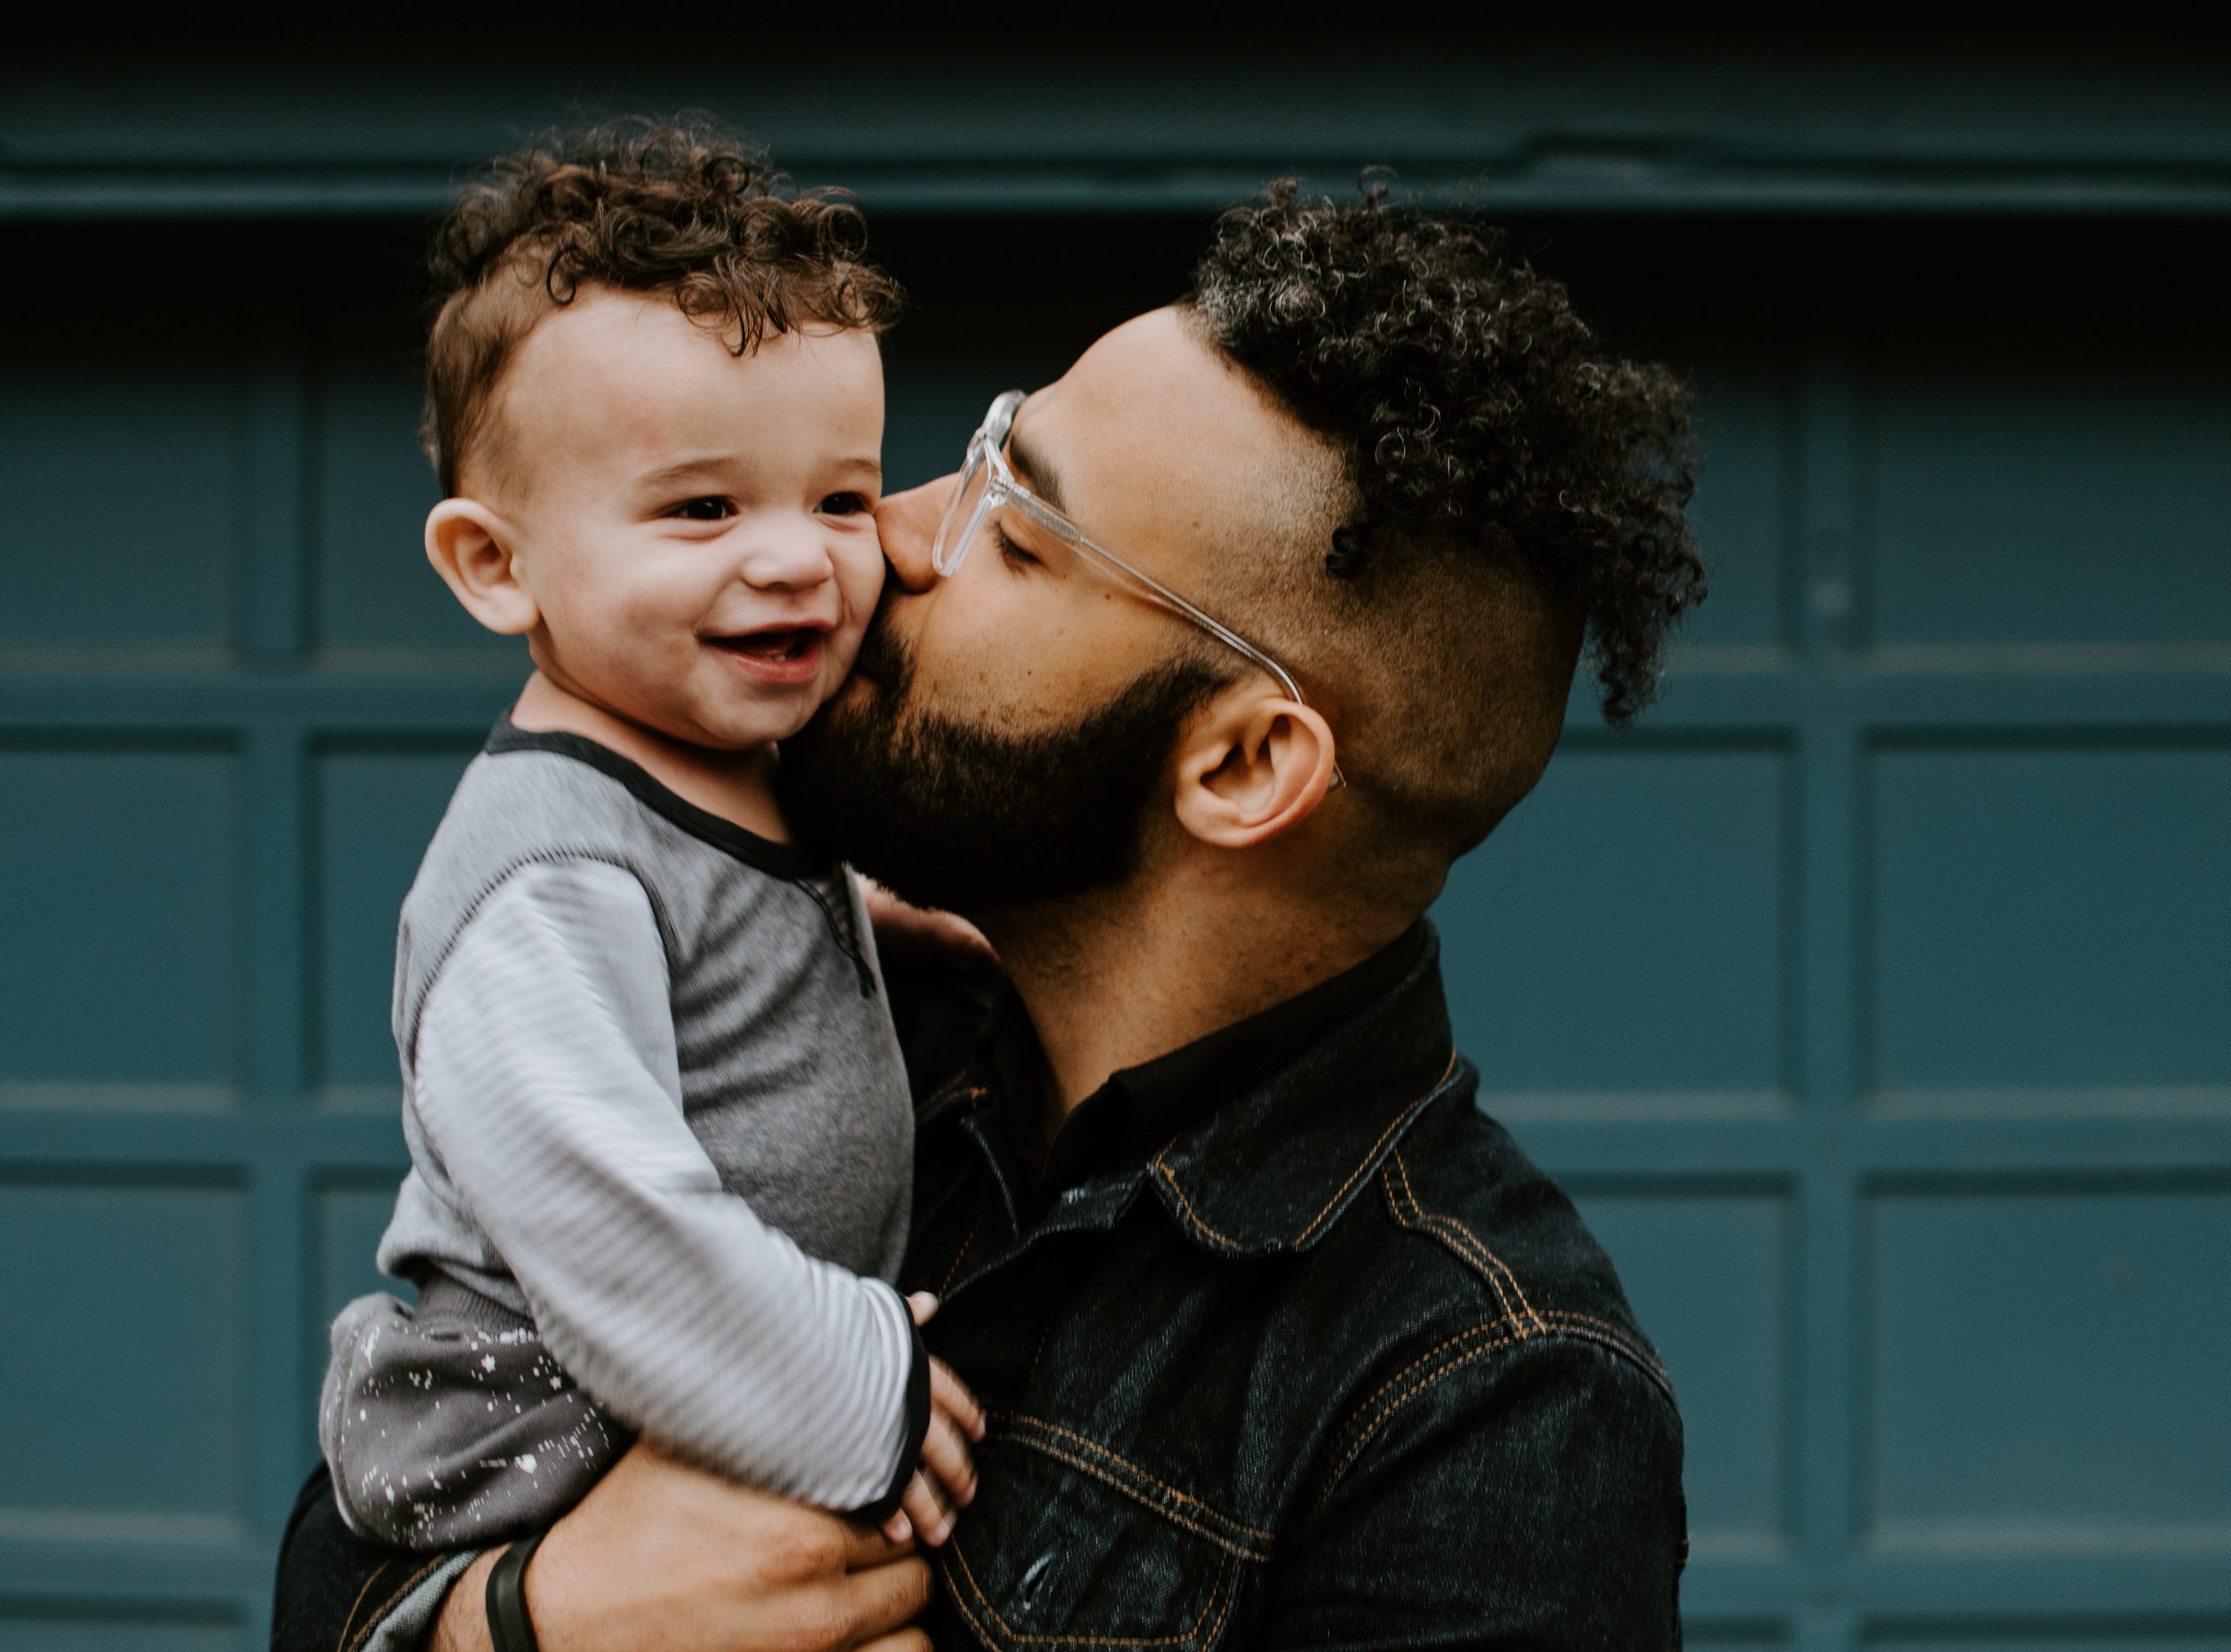 Image shows a dark, curly-haired man in his 20s or 30s holding and kissing a toddler with similar physical features and curly, dark hair, while the toddler smiles.